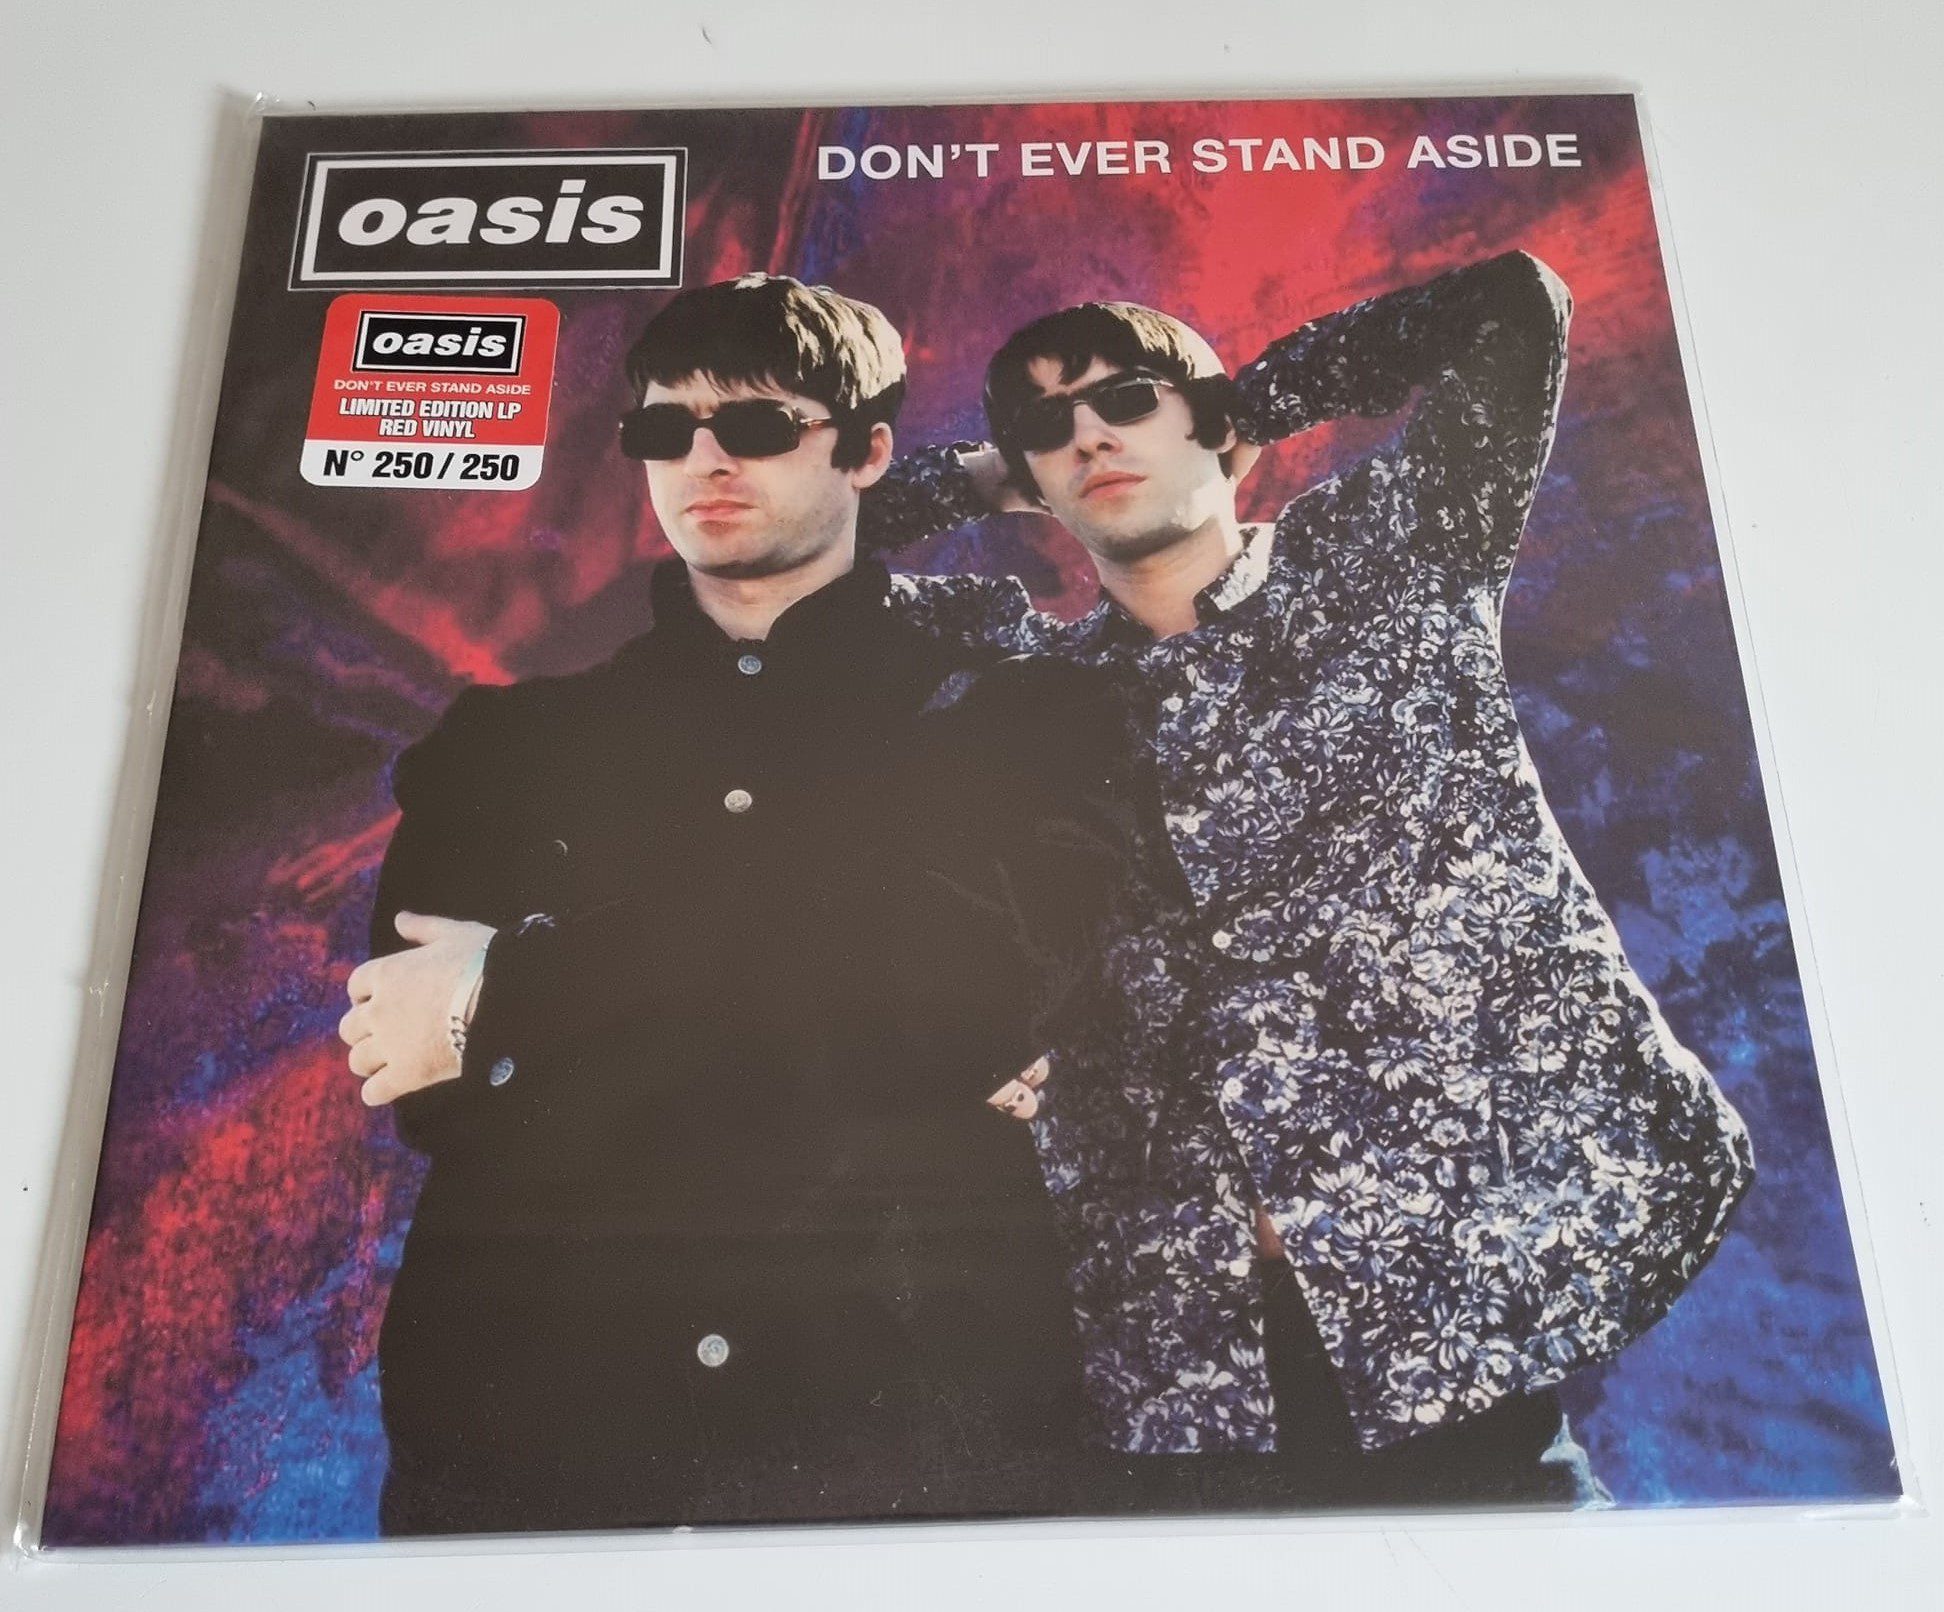 Buy this rare Oasis record by clicking here